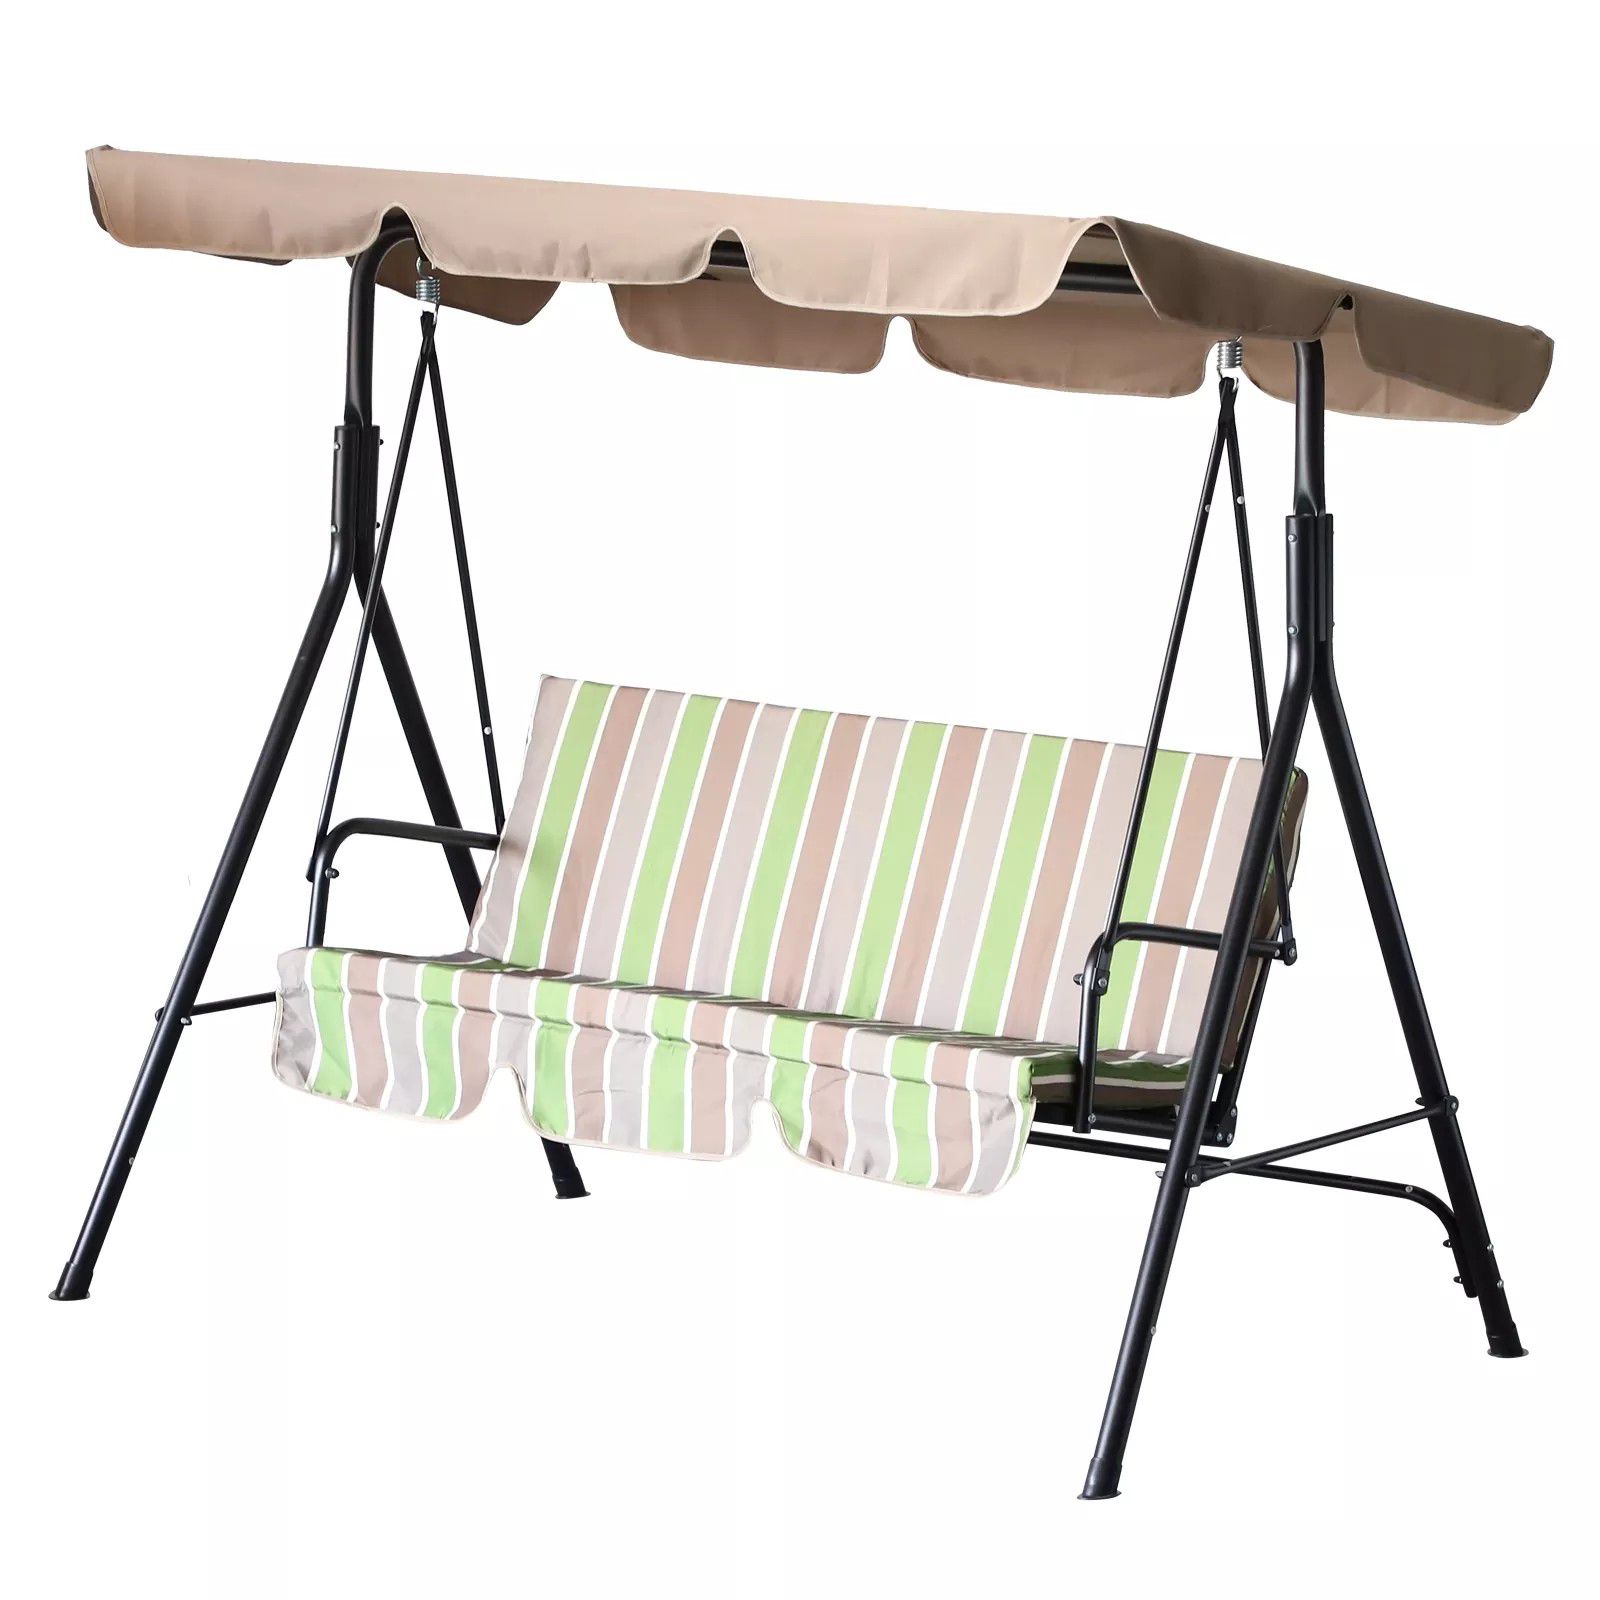 Outdoor Porch Swing Lounge Chair with Top Canopy - Multi-color